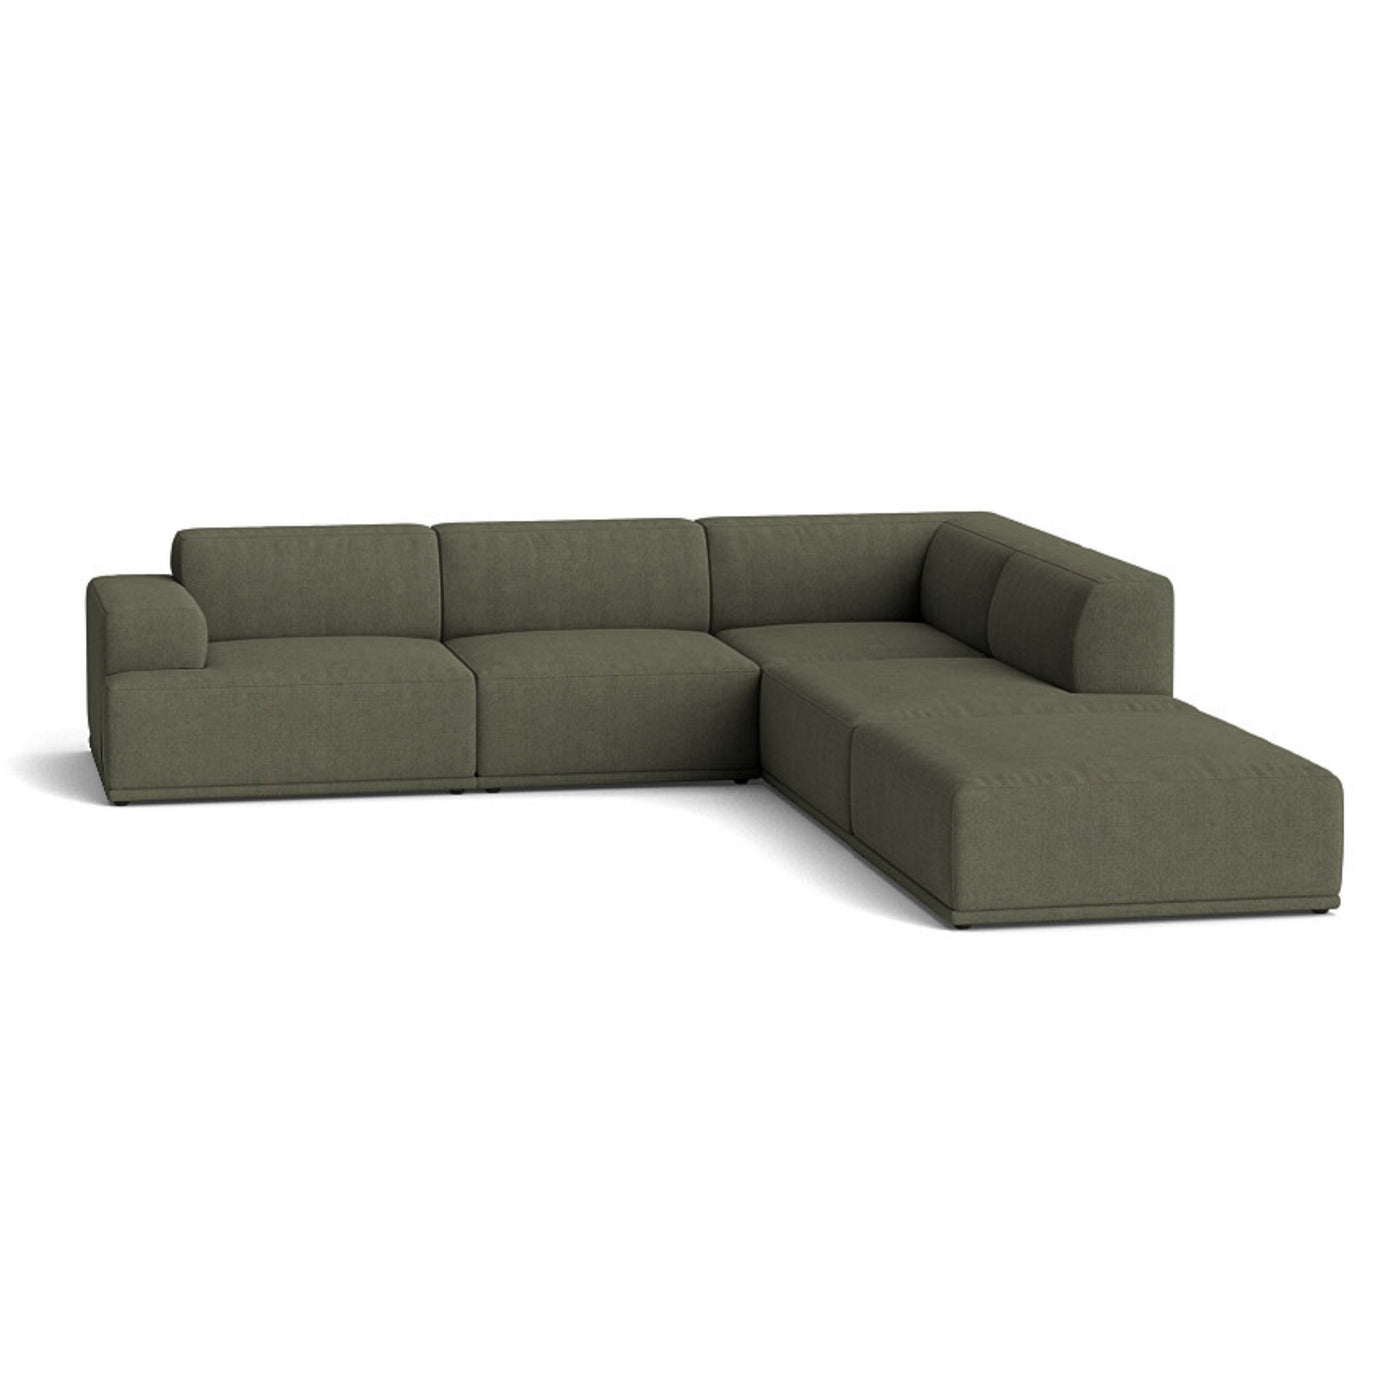 Muuto Connect Soft Modular Corner Sofa, configuration 2. Made-to-order from someday designs. #colour_fiord-961